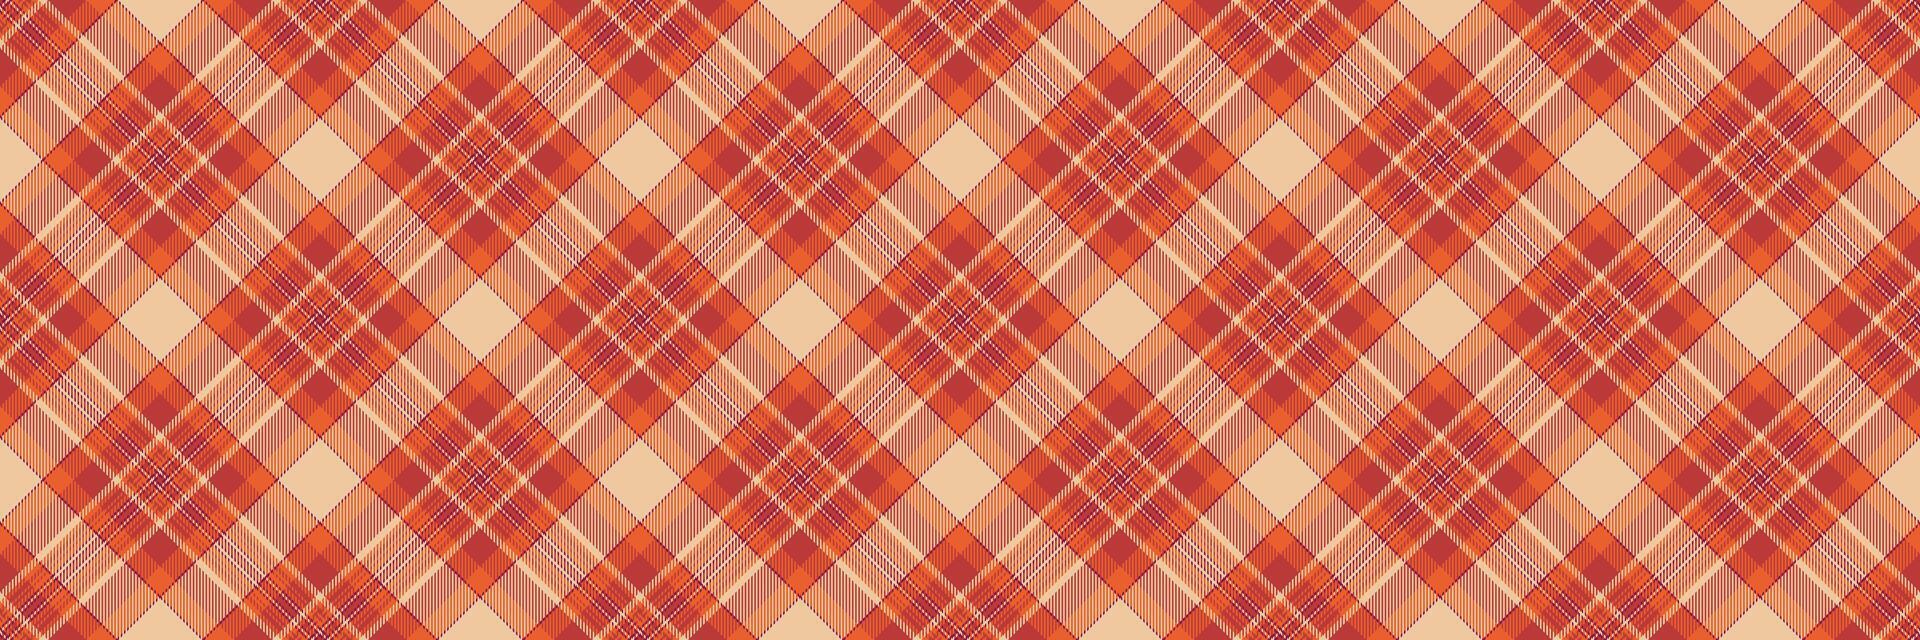 60s plaid pattern background, mockup seamless check tartan. Proud vector texture fabric textile in orange and red colors.